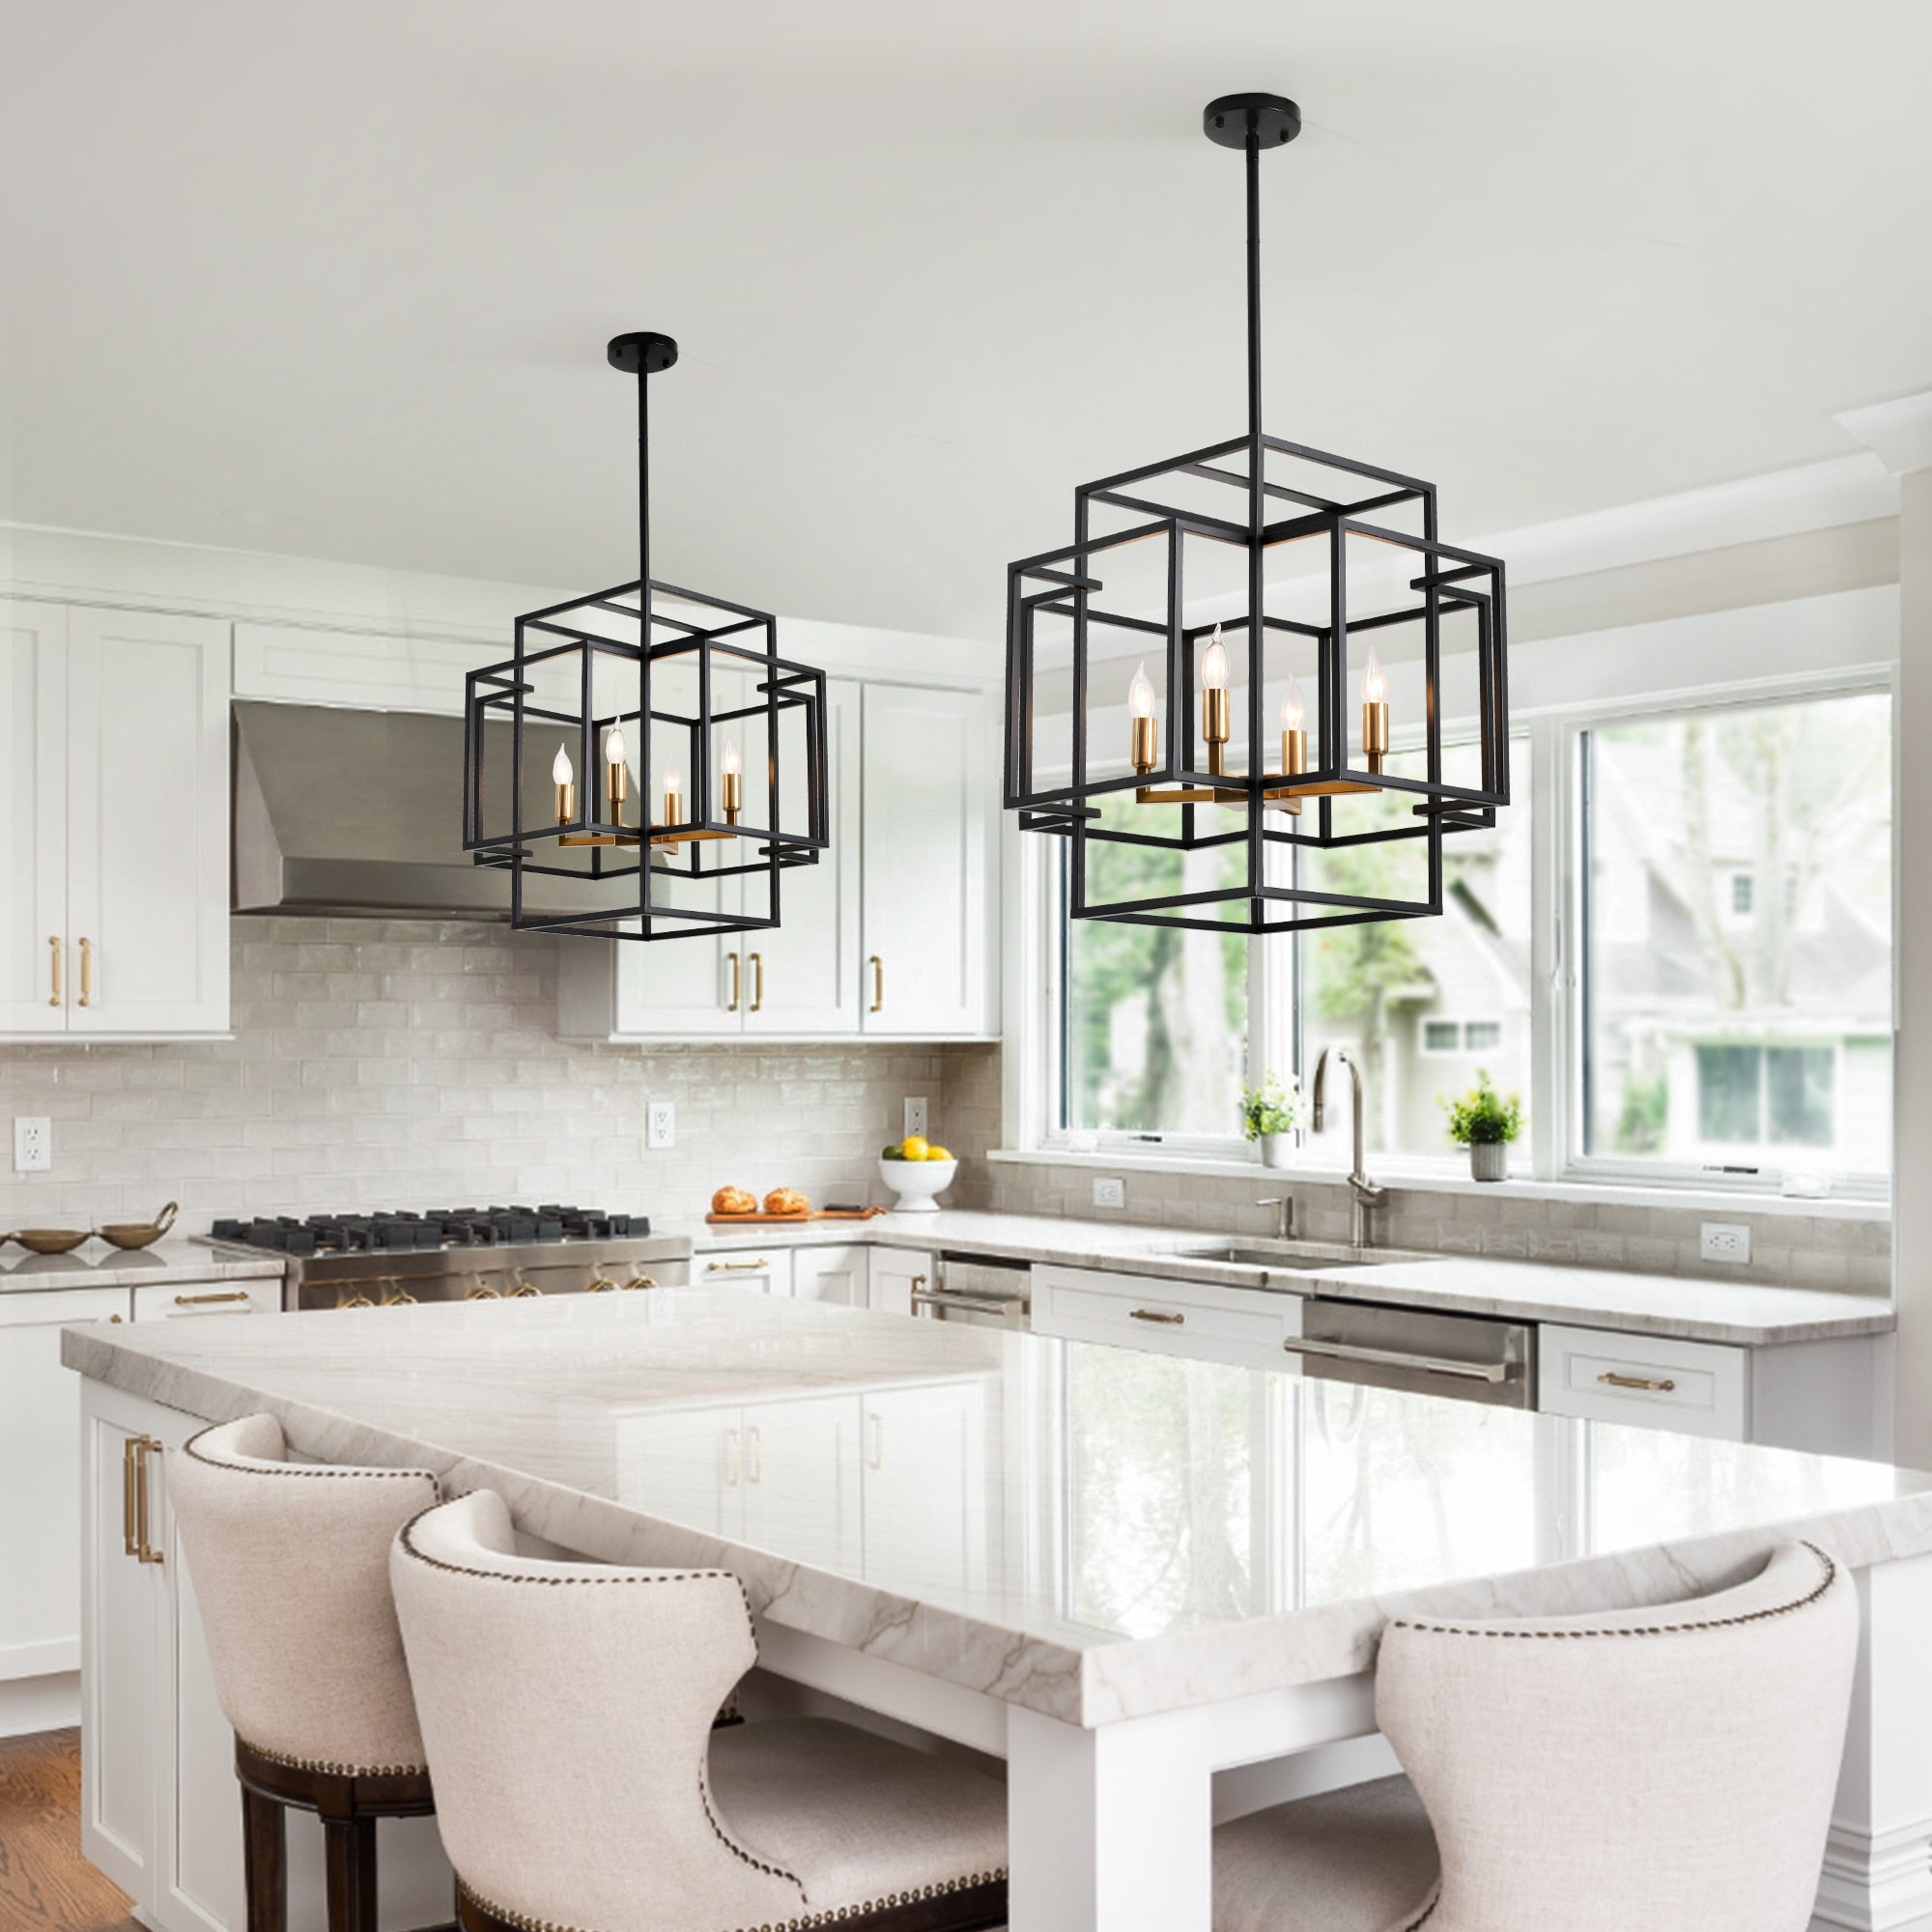 4-Lights Lantern American Style Pendant Lights Fixtures Industrial Farmhouse Hanging Chandelier for Living Room Island Kitchen